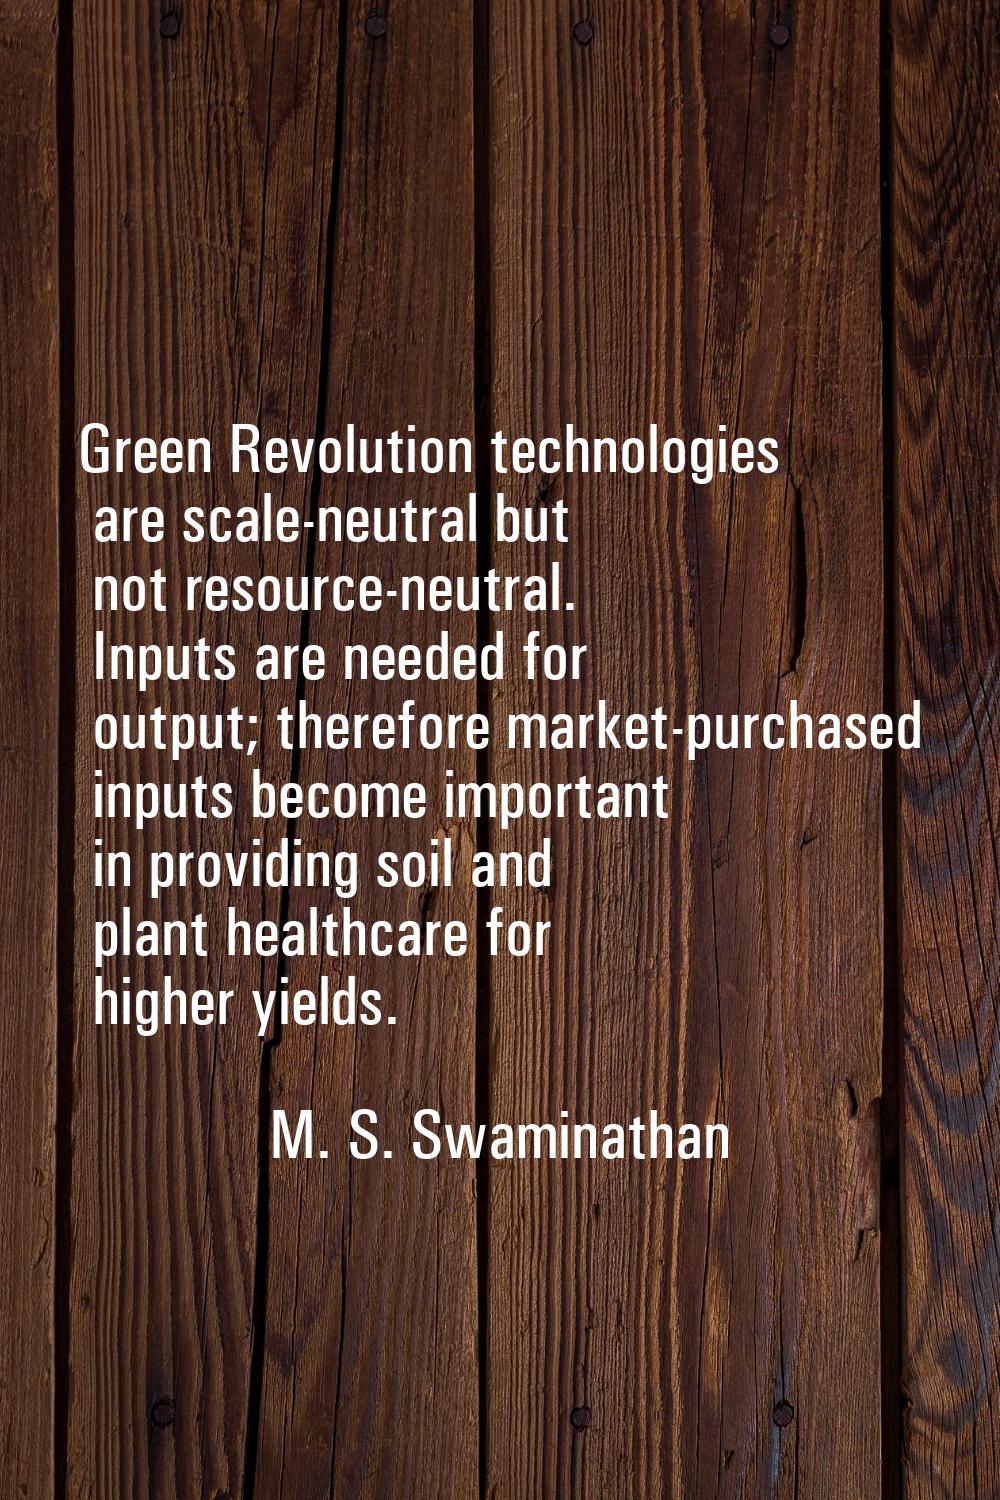 Green Revolution technologies are scale-neutral but not resource-neutral. Inputs are needed for out